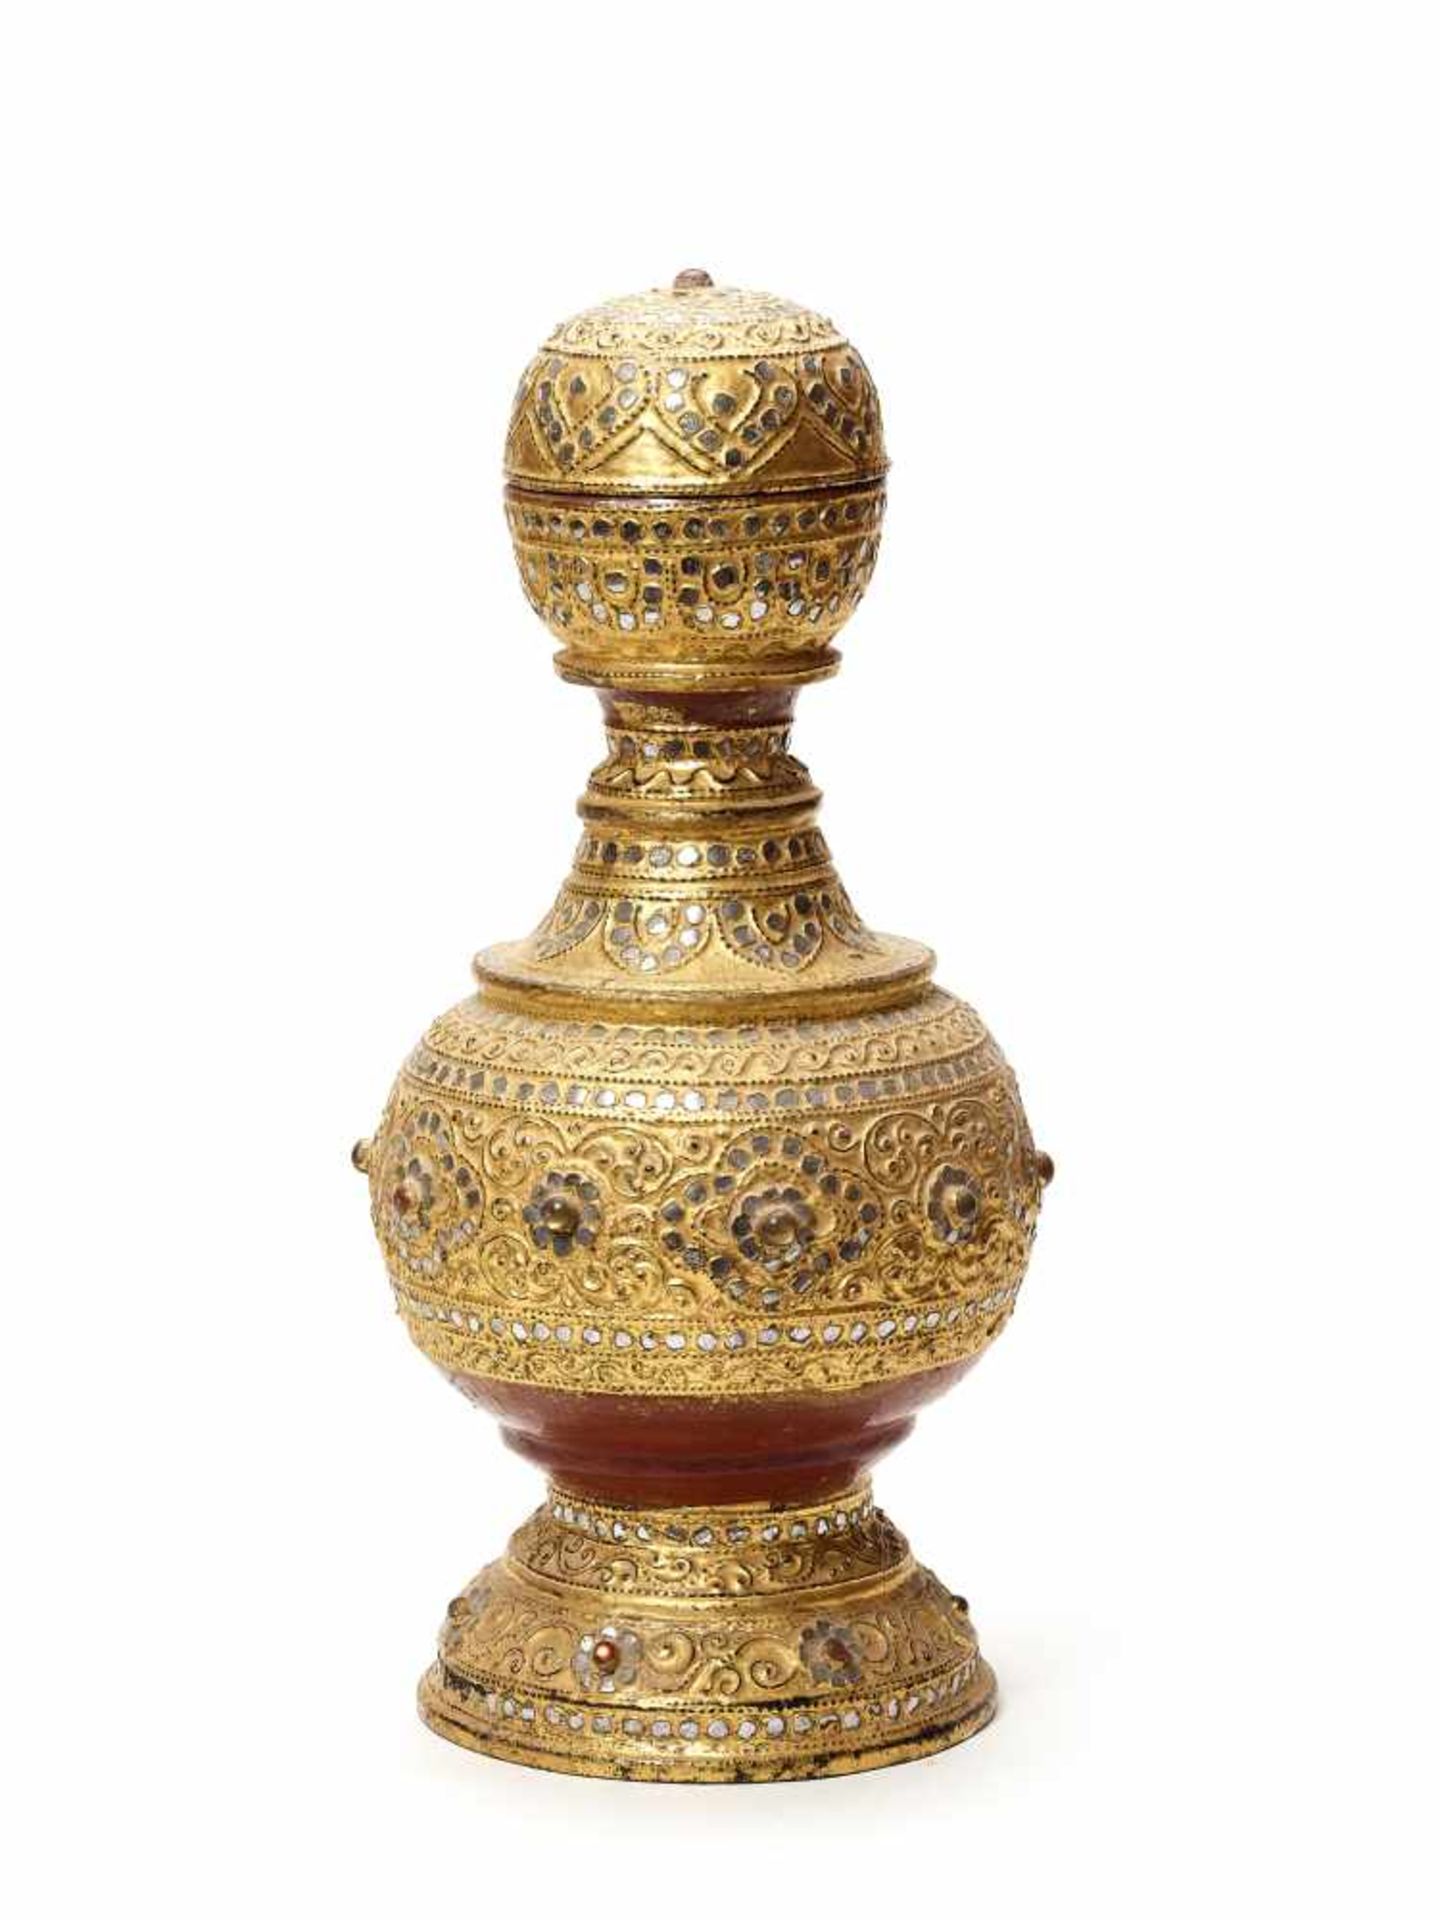 A BURMESE MANDALAY-STYLE LACQUER GILT WOOD LIDDED VESSEL IN THE SHAPE OF A PAGODAWood, gold and - Image 2 of 5